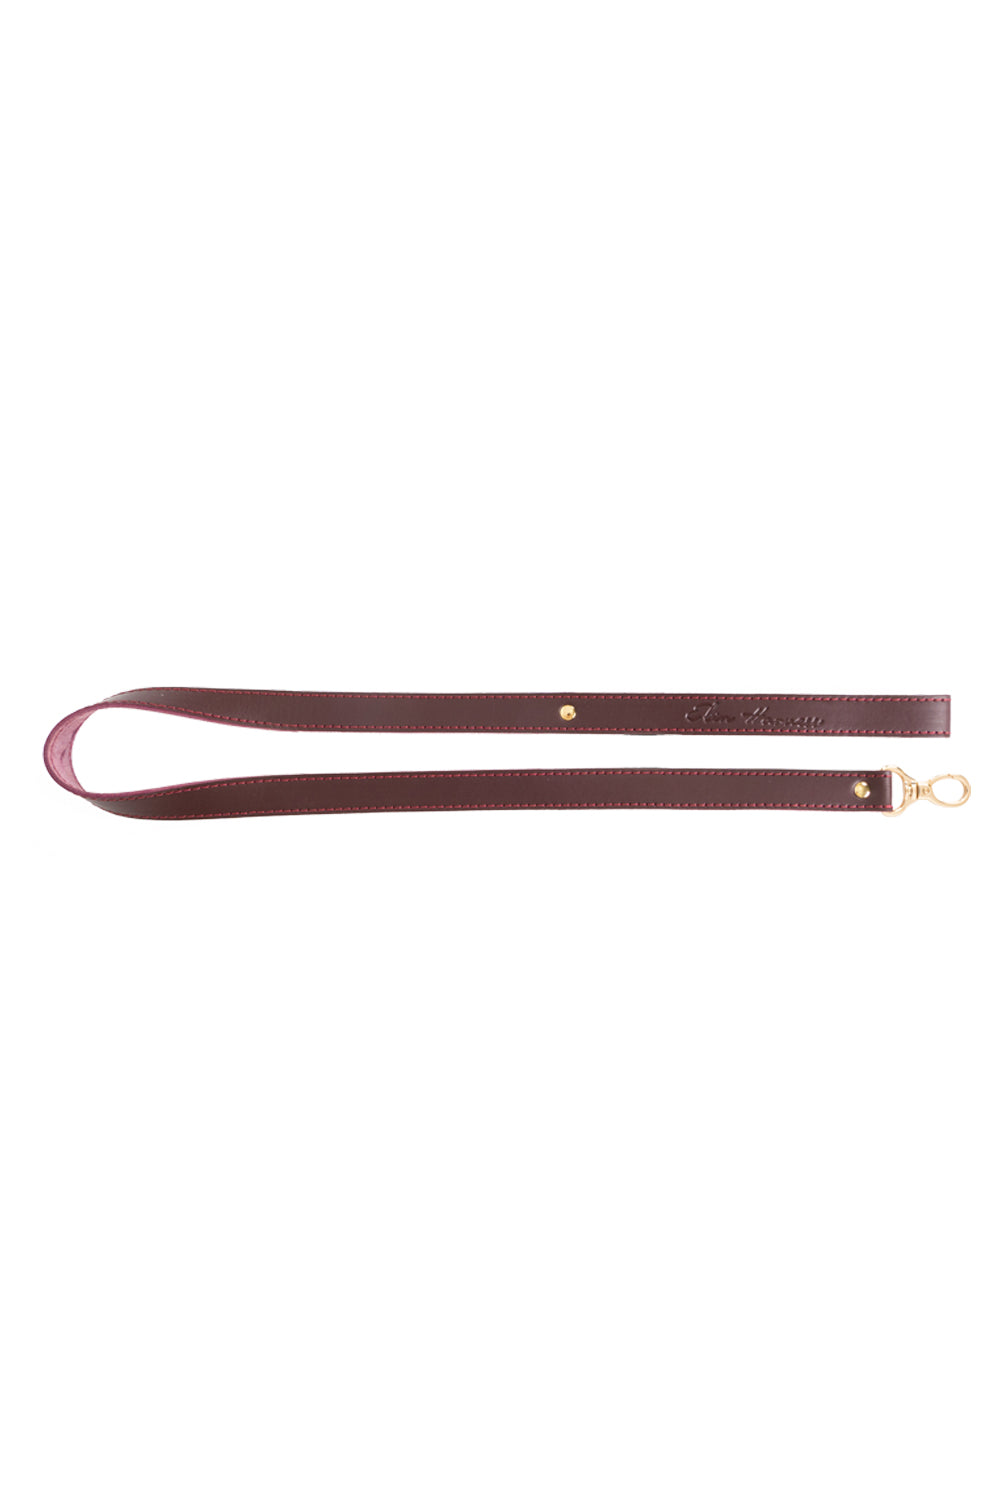 Leather leash. Red